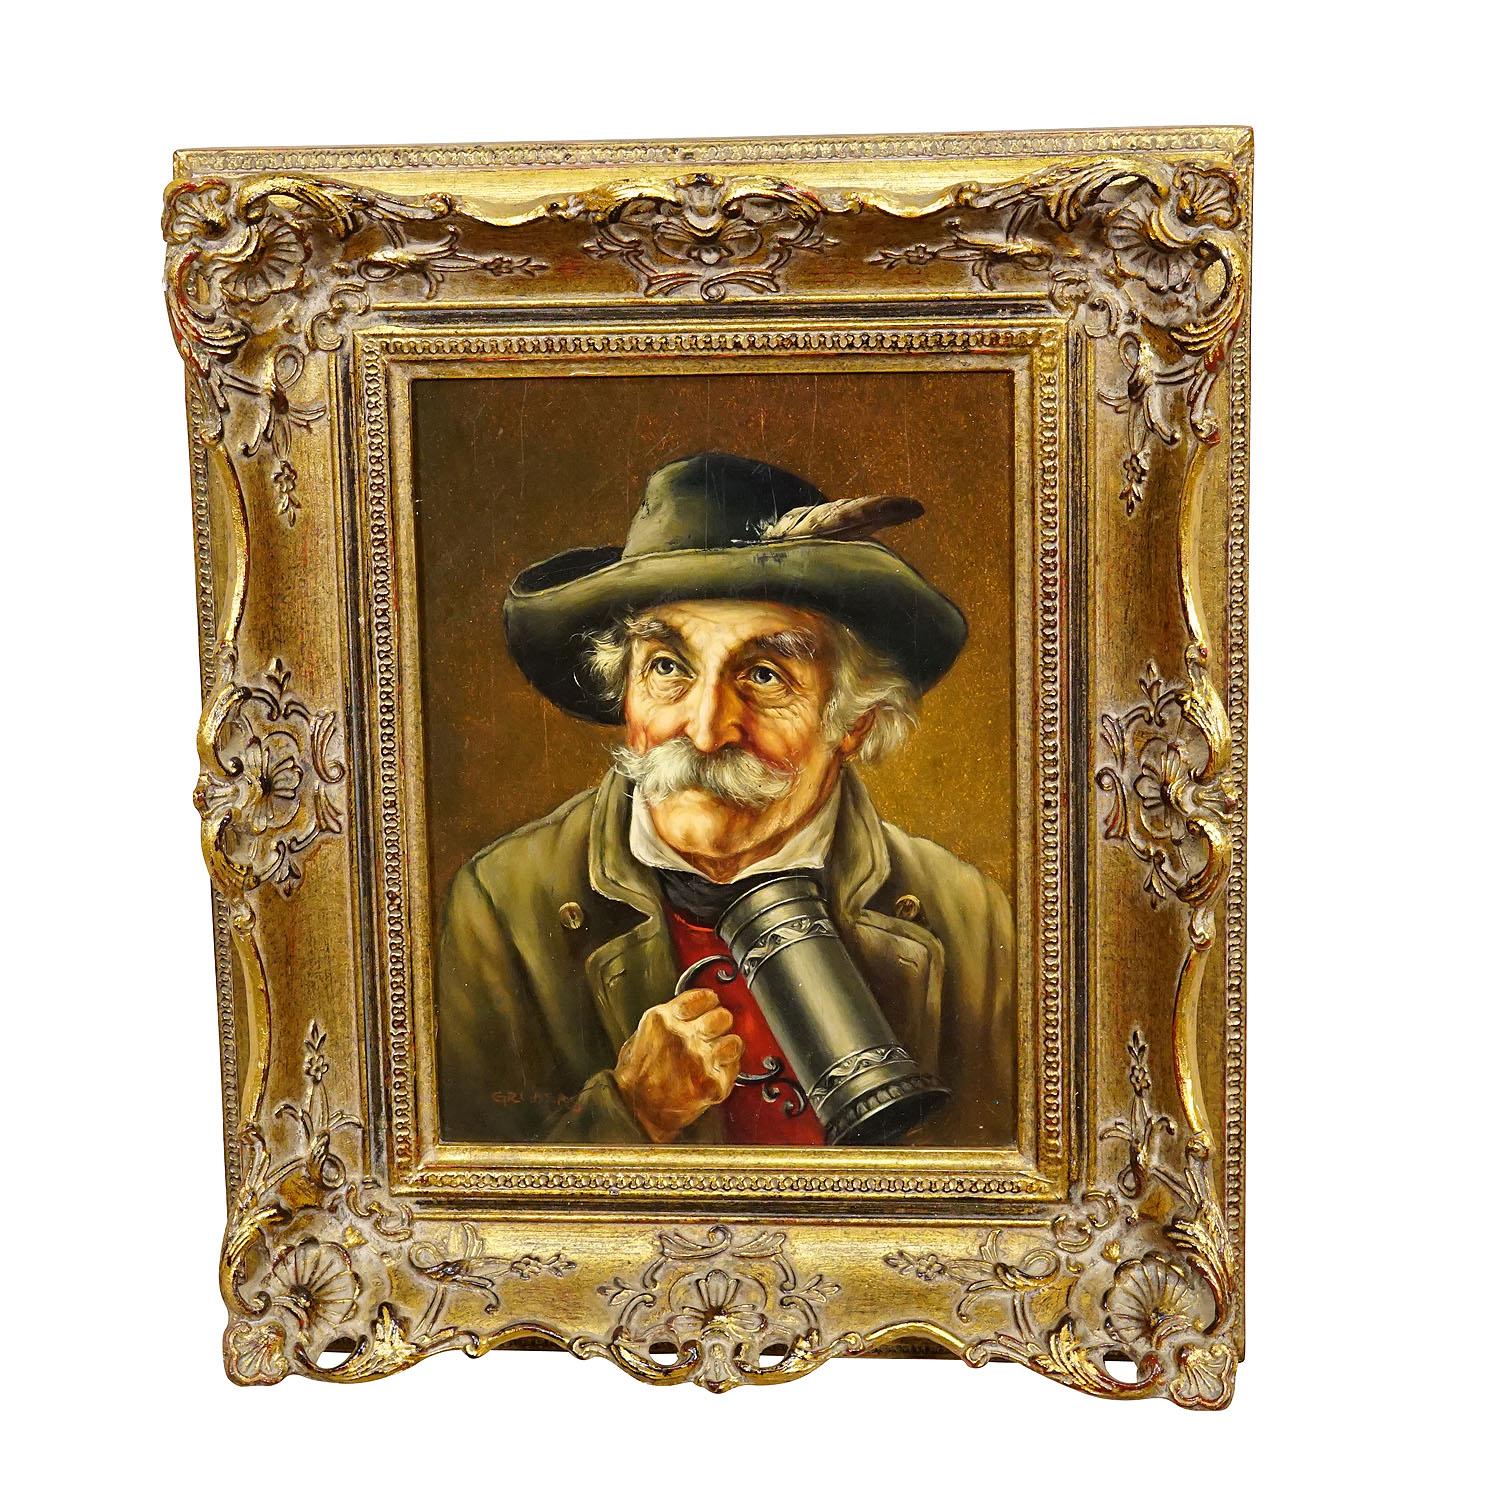 J. Gruber - Portrait of a Bavarian Folksy Man with Beer Mug, Oil on Wood

A colorful oil painting depicting a beer drinking folksy Bavarian man in his sunday robe. Painted on wood with pastel colors around 1950s. Framed with wooden carved and gilded